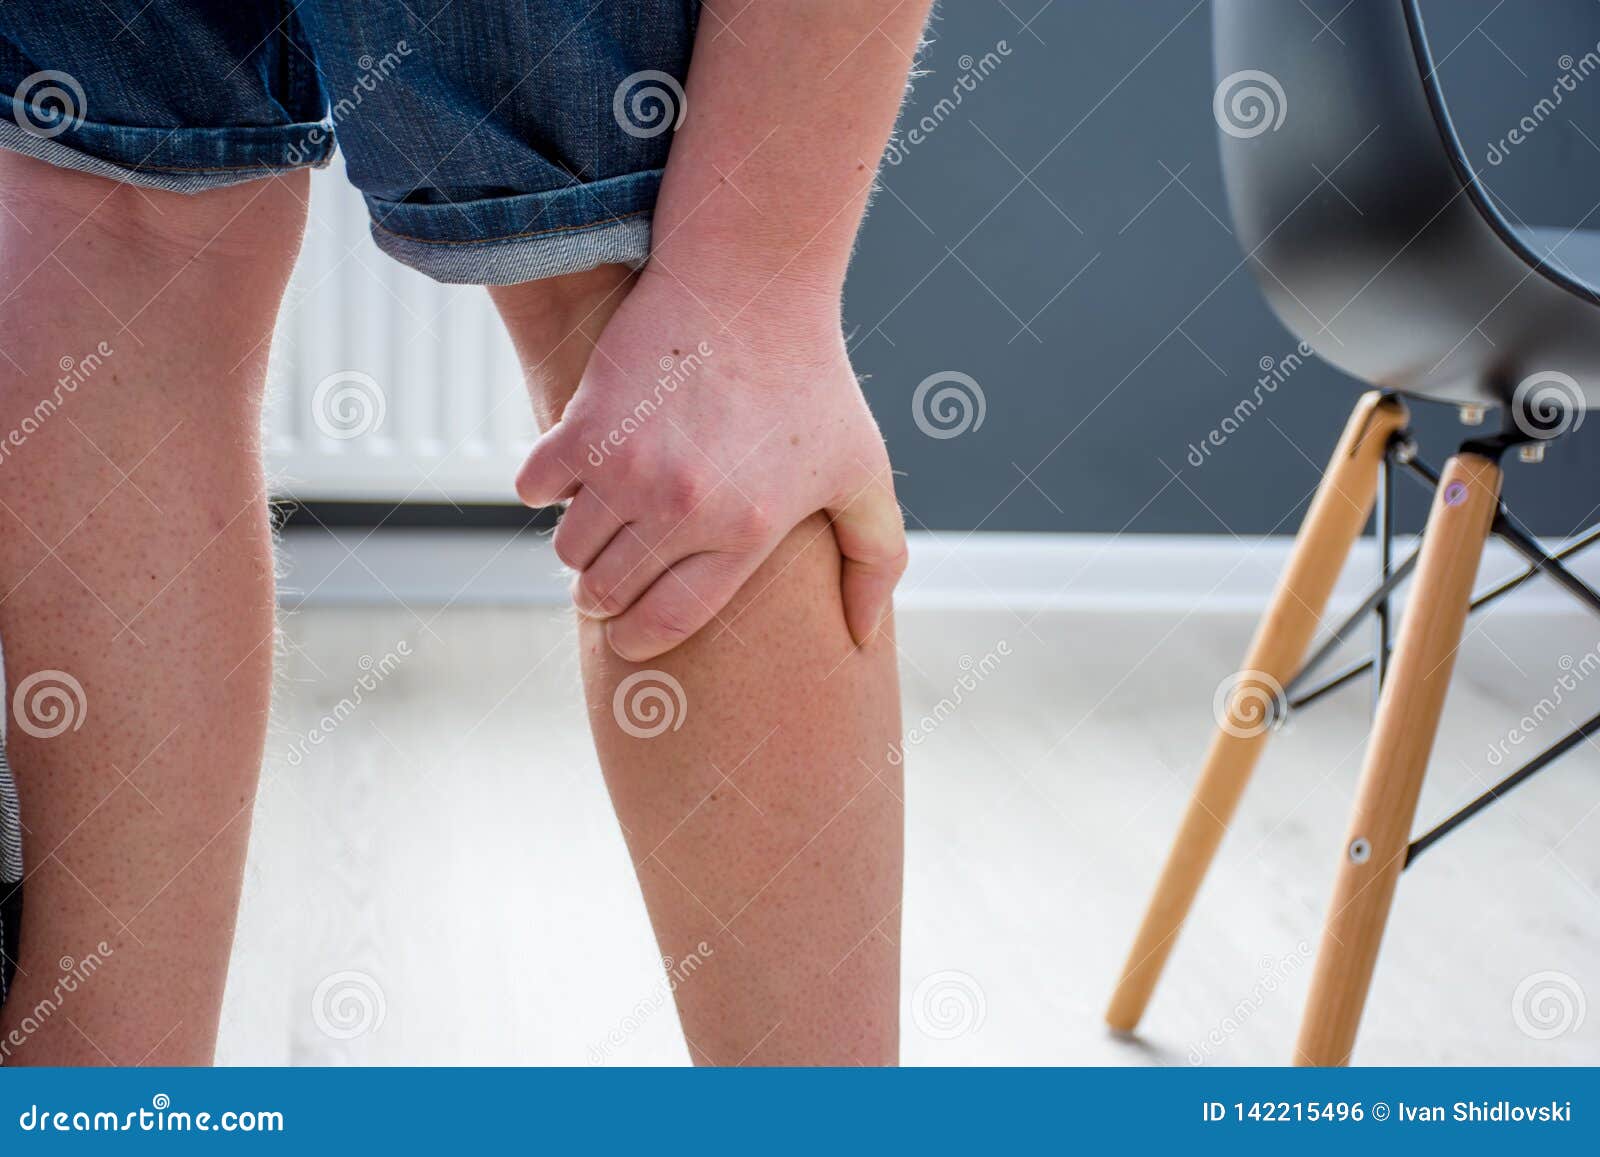 human, who had been elevated from chair, holding his palm over calf or gastrocnemius muscle, which grabbed cramp with severe pain.